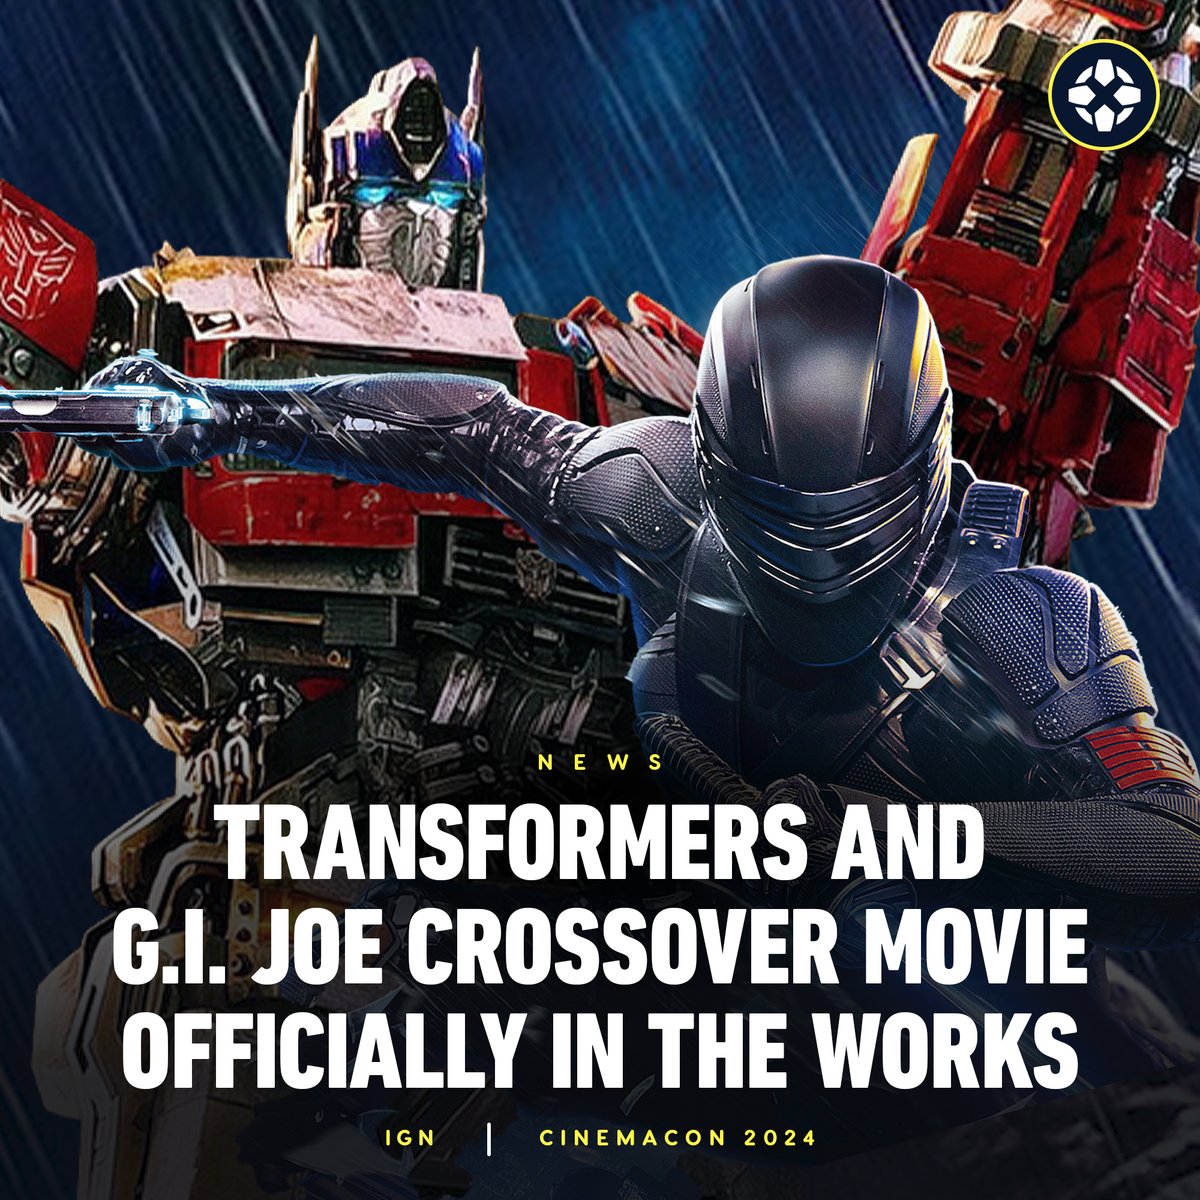 Initially teased in Rise of the Beasts, Paramount announced at their CinemaCon presentation that a Transformers and G.I. Joe crossover movie is officially happening. bit.ly/49GBbAc